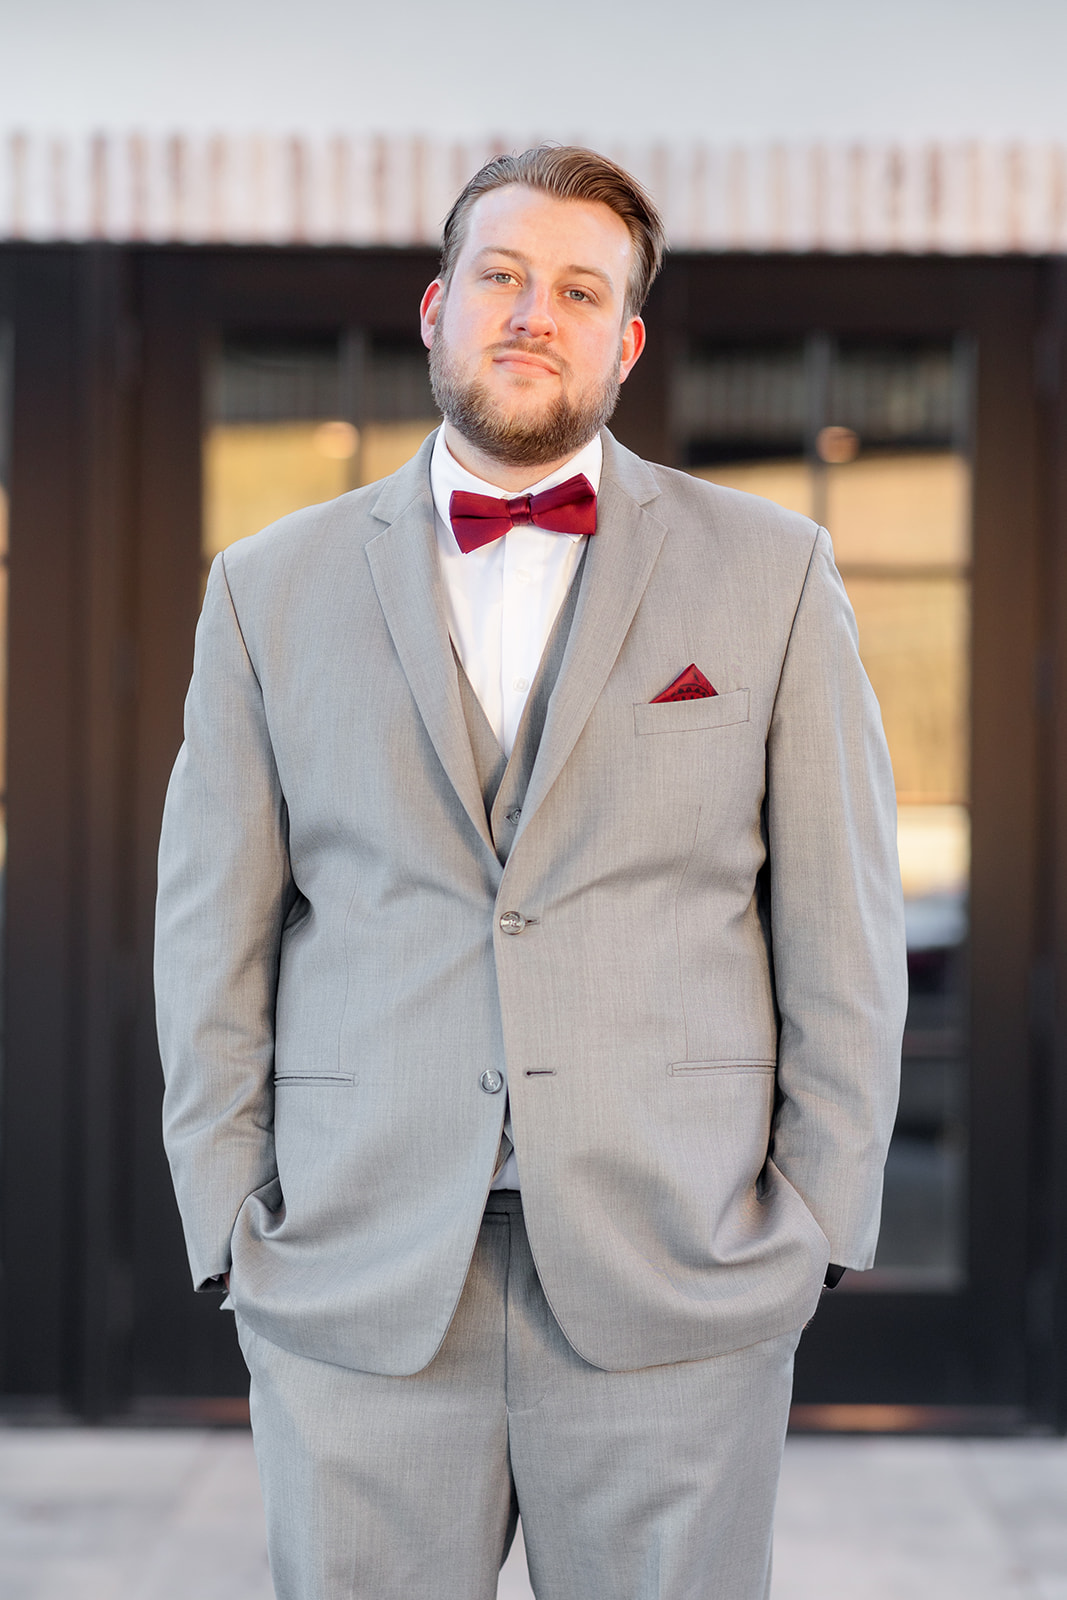 A groom stands with hands in the pockets of his grey suit with a red bowtie